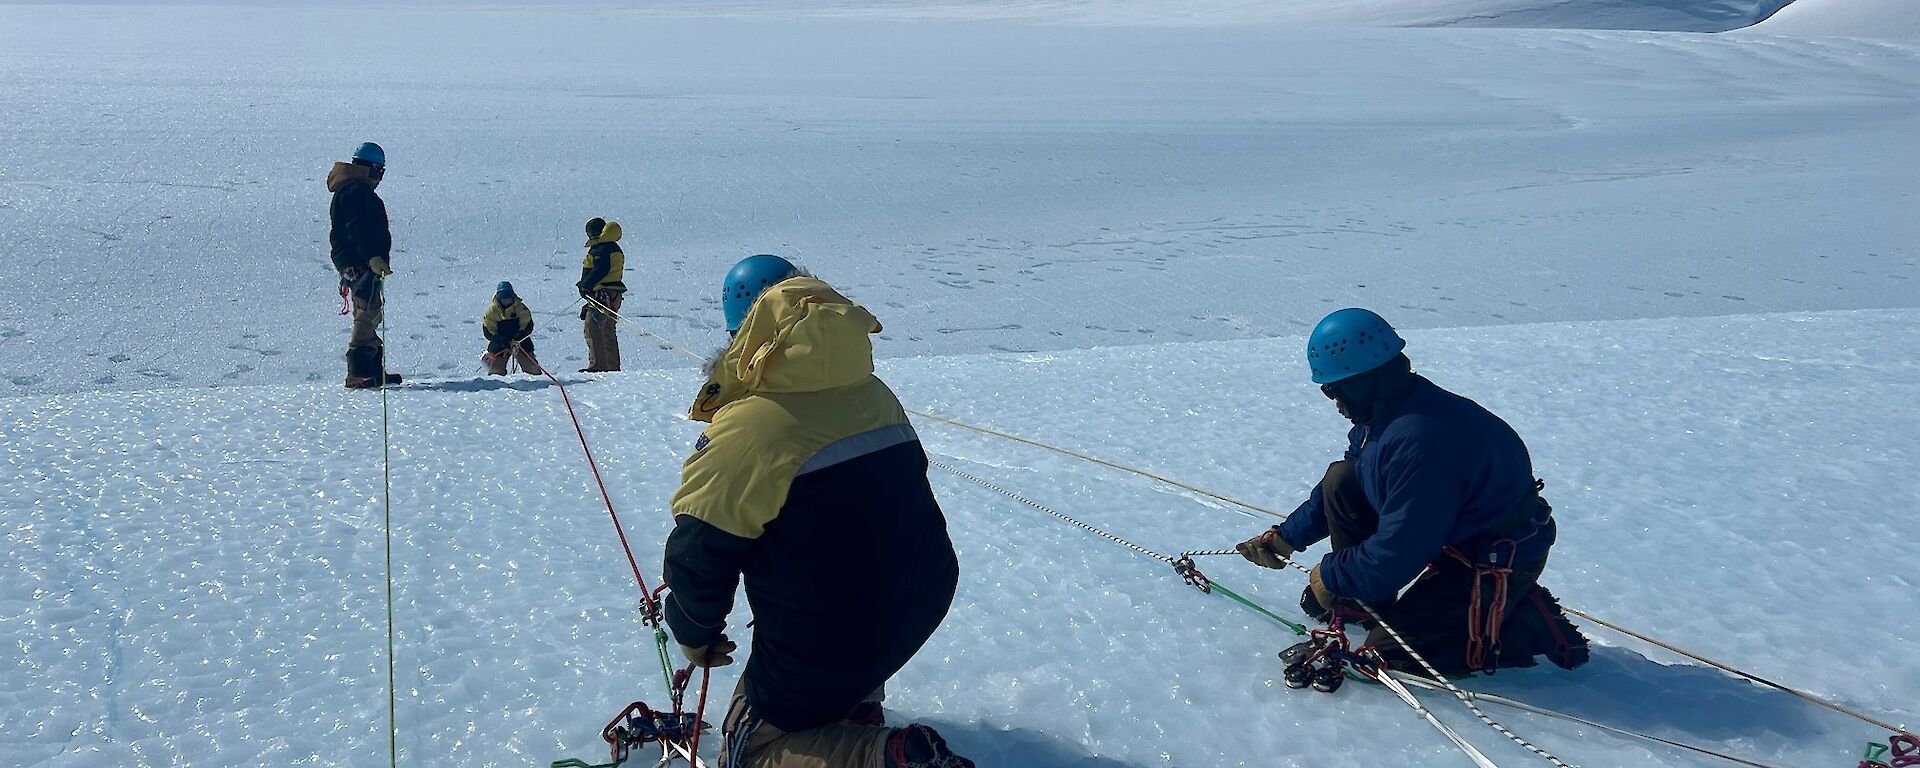 Man abseiling over ice edge with two people at top managing lines held in place on the ice